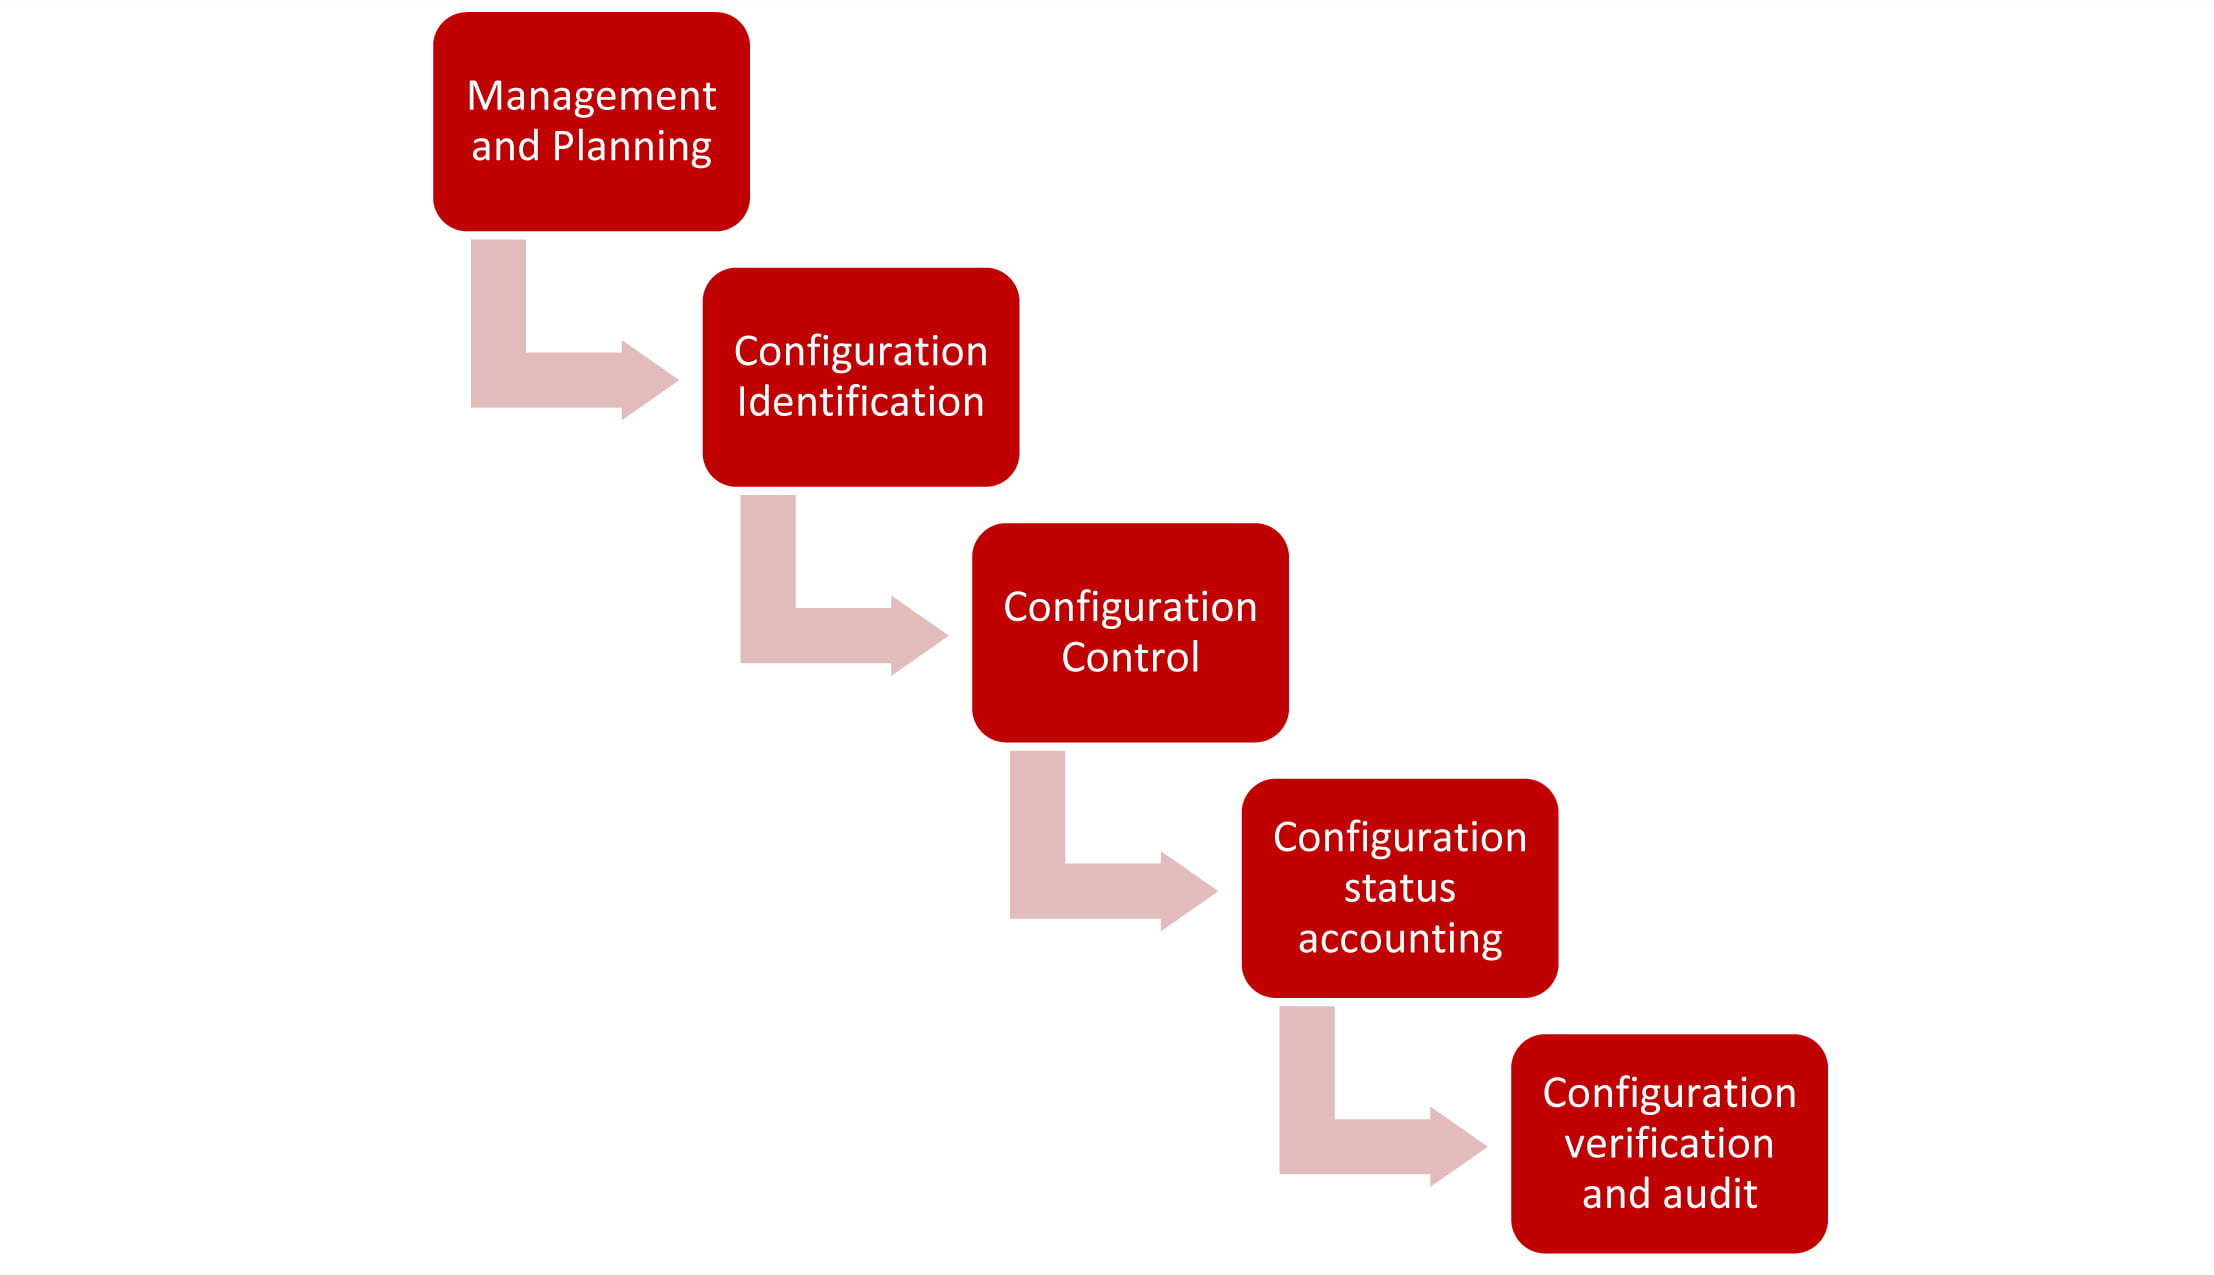 The five elements of configuration management according to ISO 10007